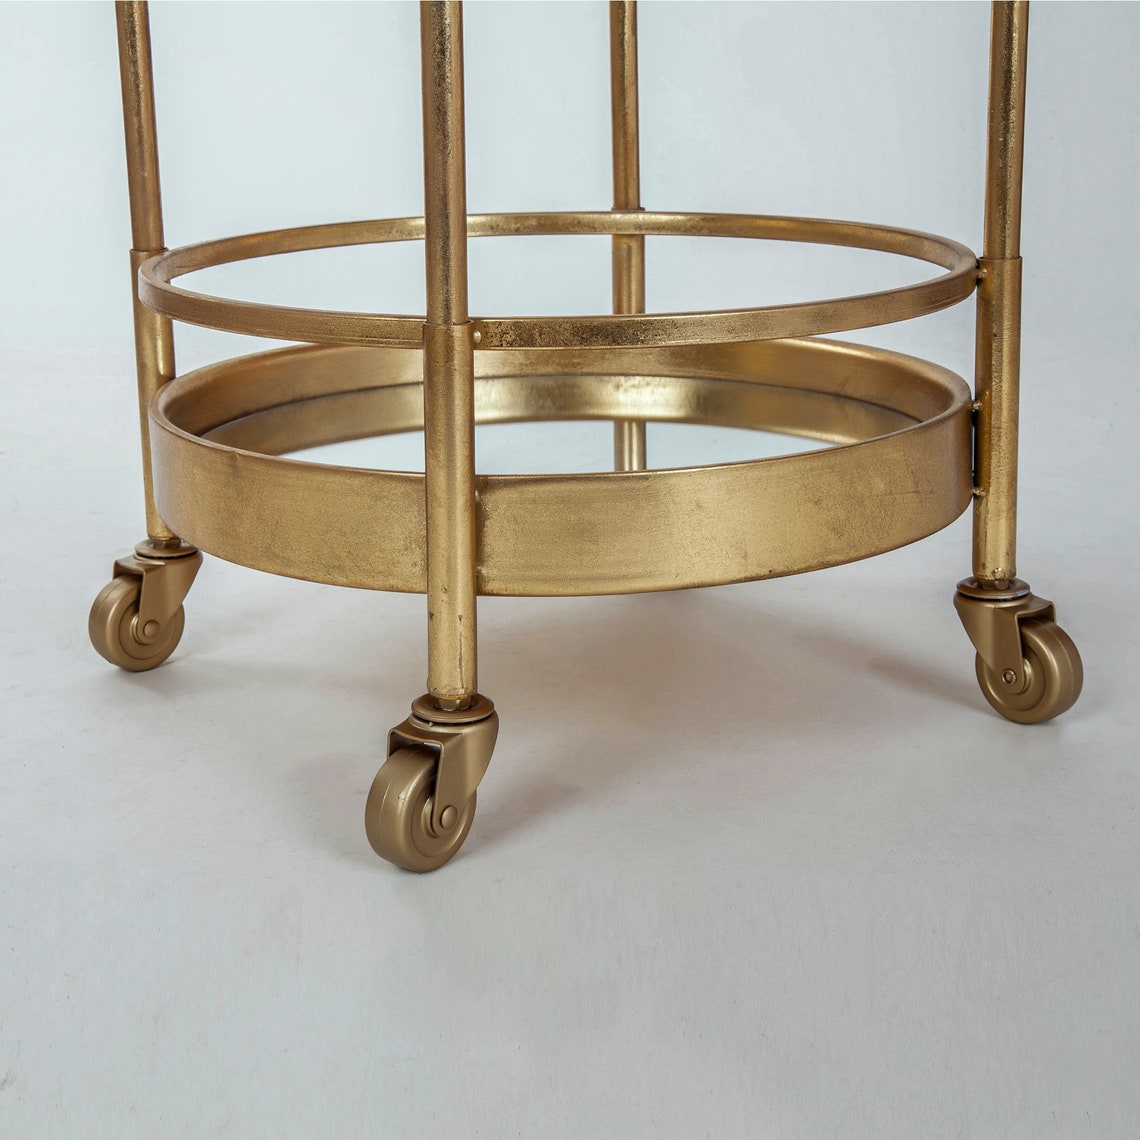 Glamorous round gold leaf, drinks/ serving trolley